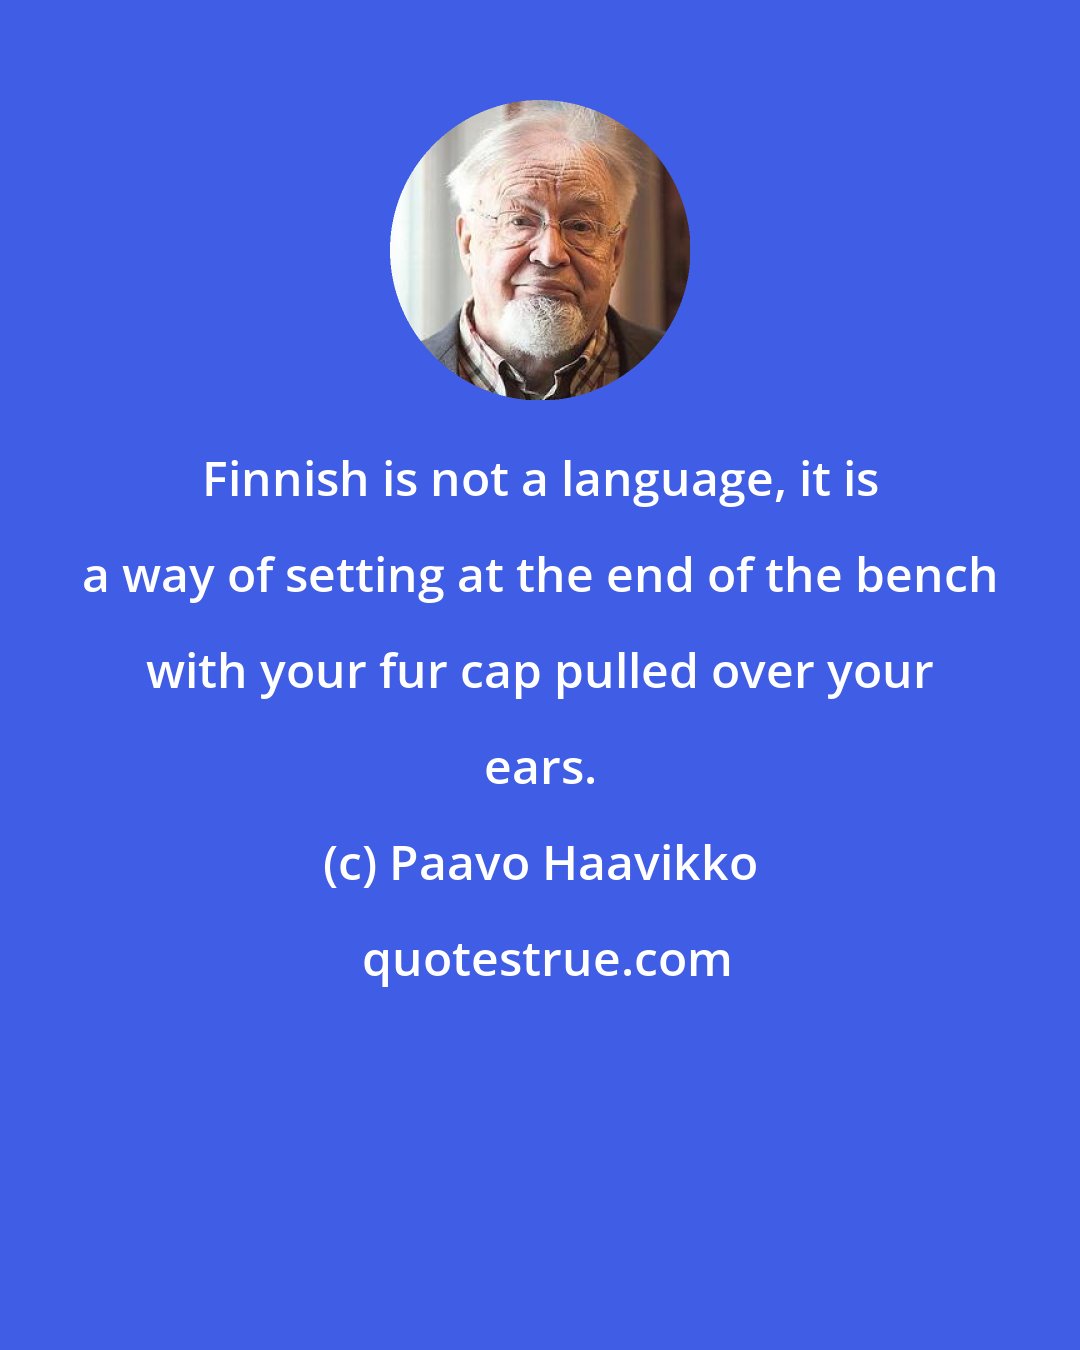 Paavo Haavikko: Finnish is not a language, it is a way of setting at the end of the bench with your fur cap pulled over your ears.